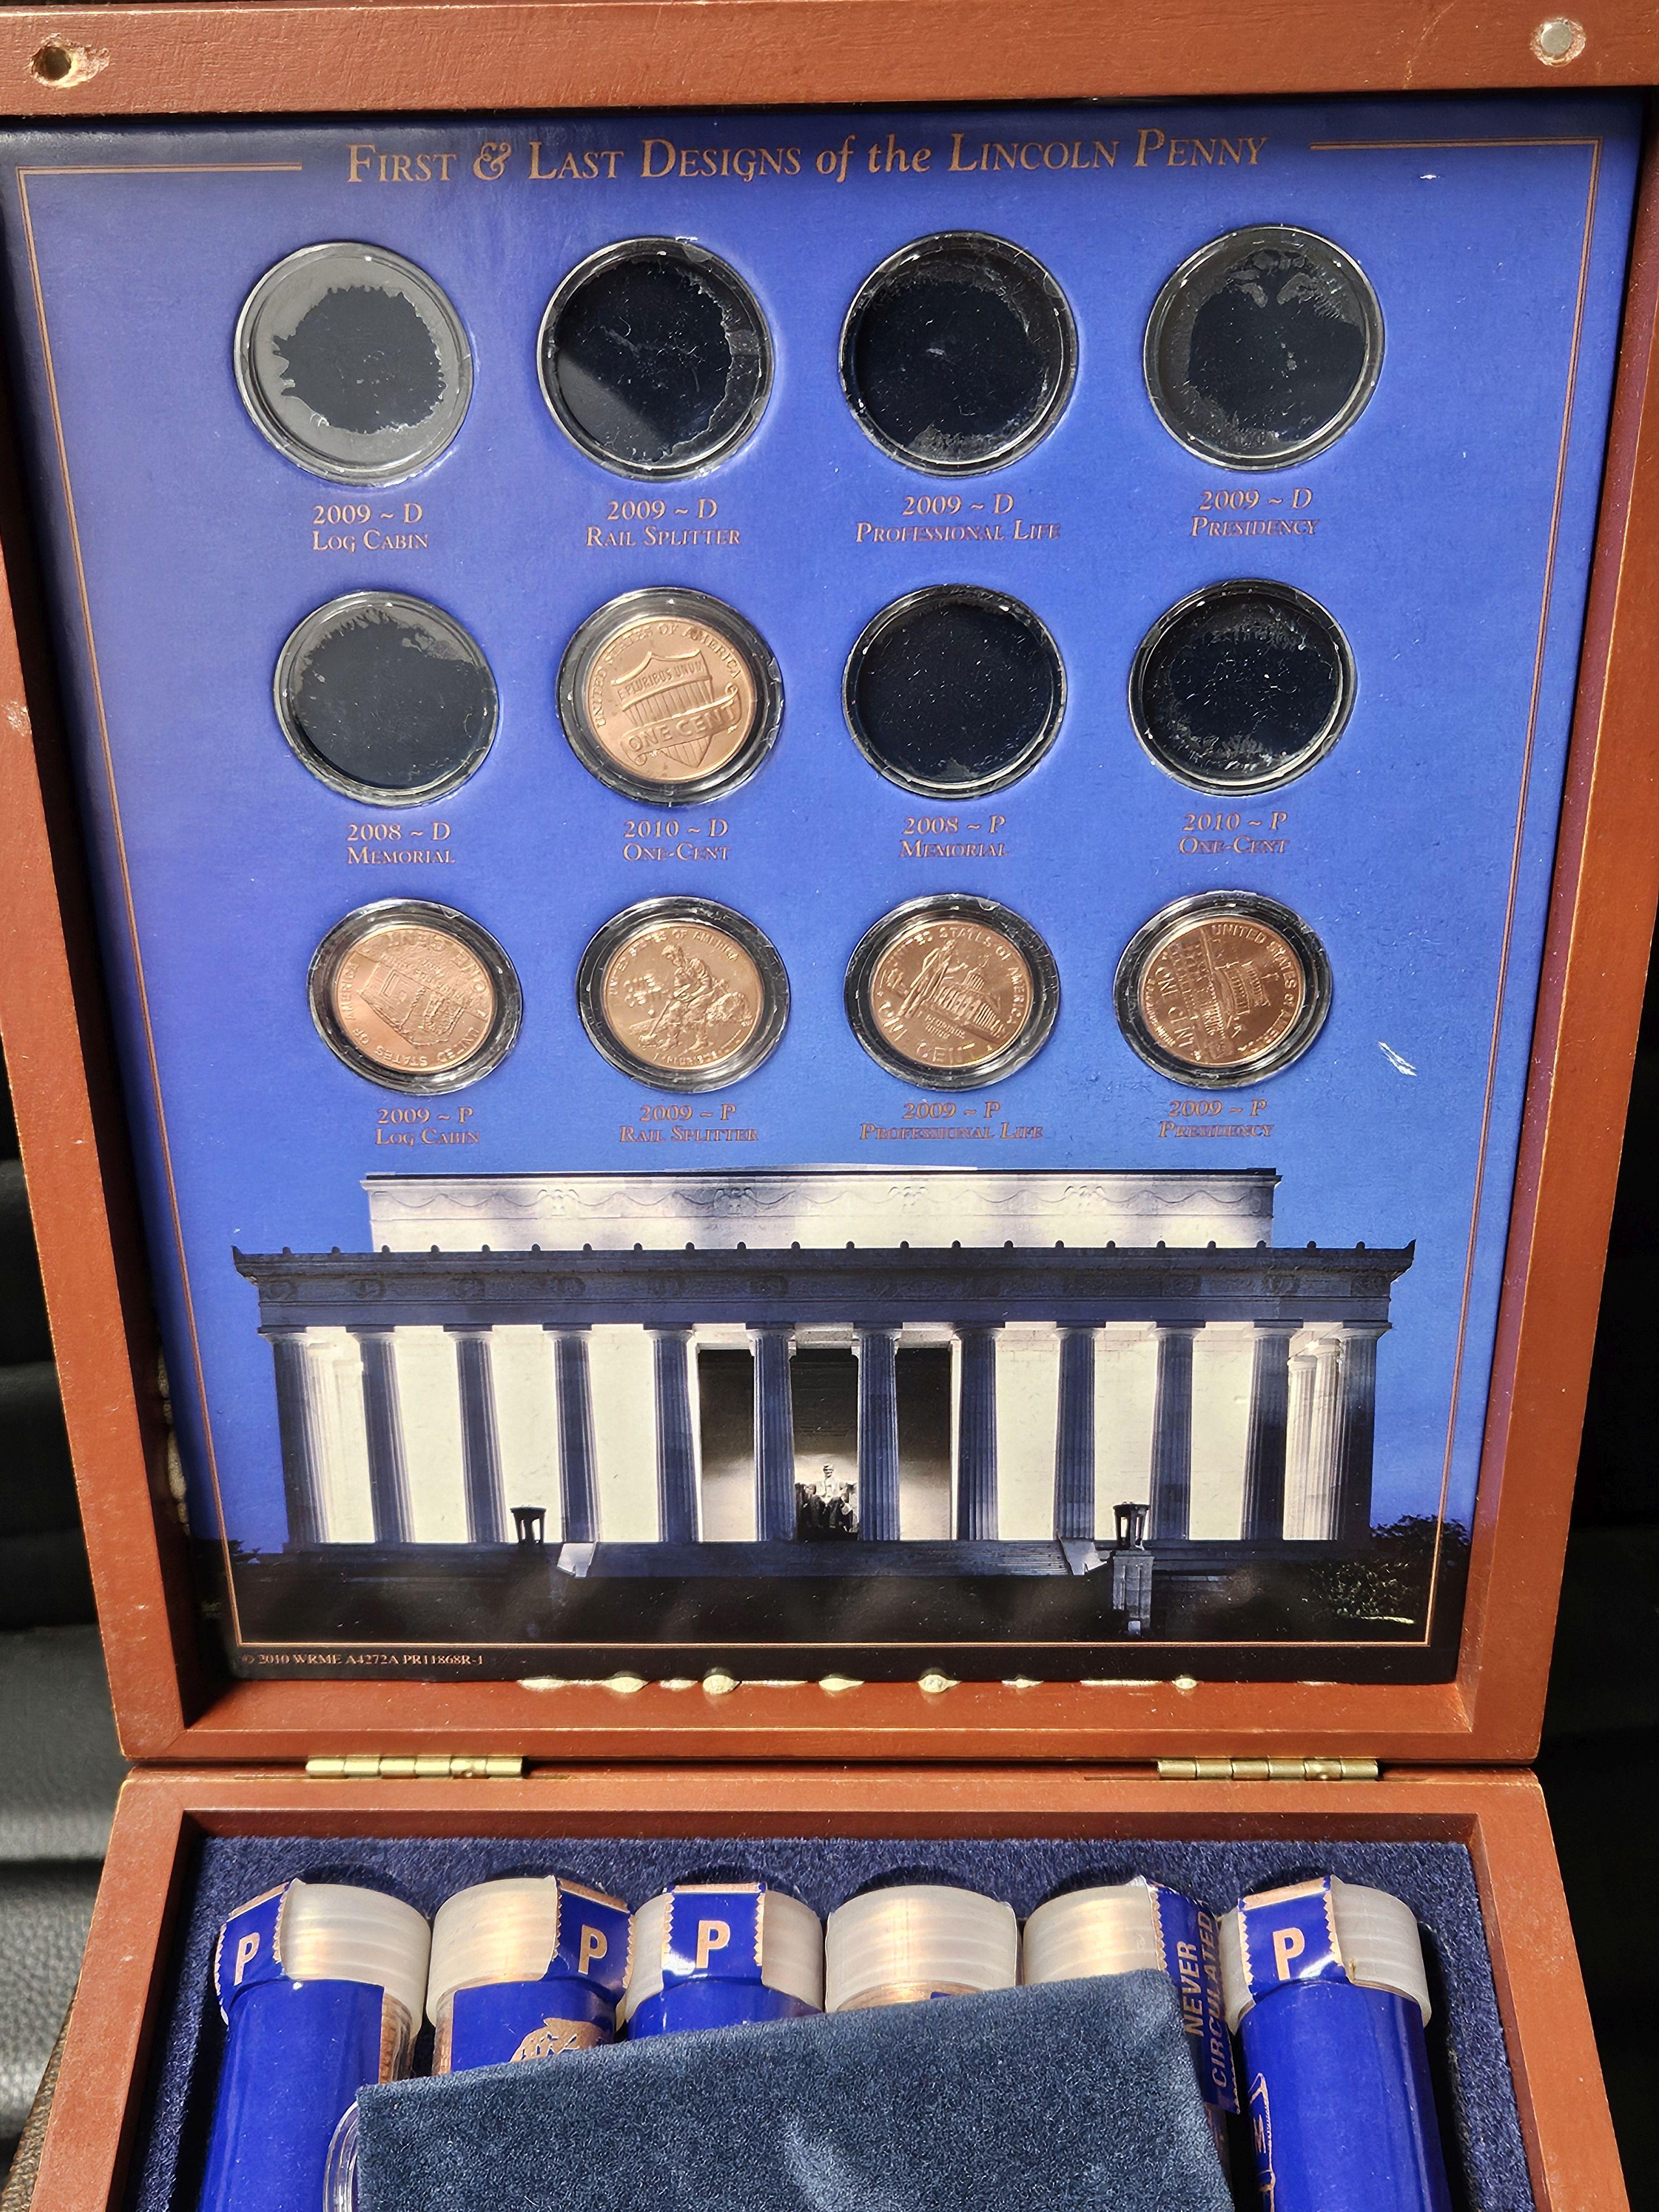 2009 Penny set with 12 bu rolls from P & D mints